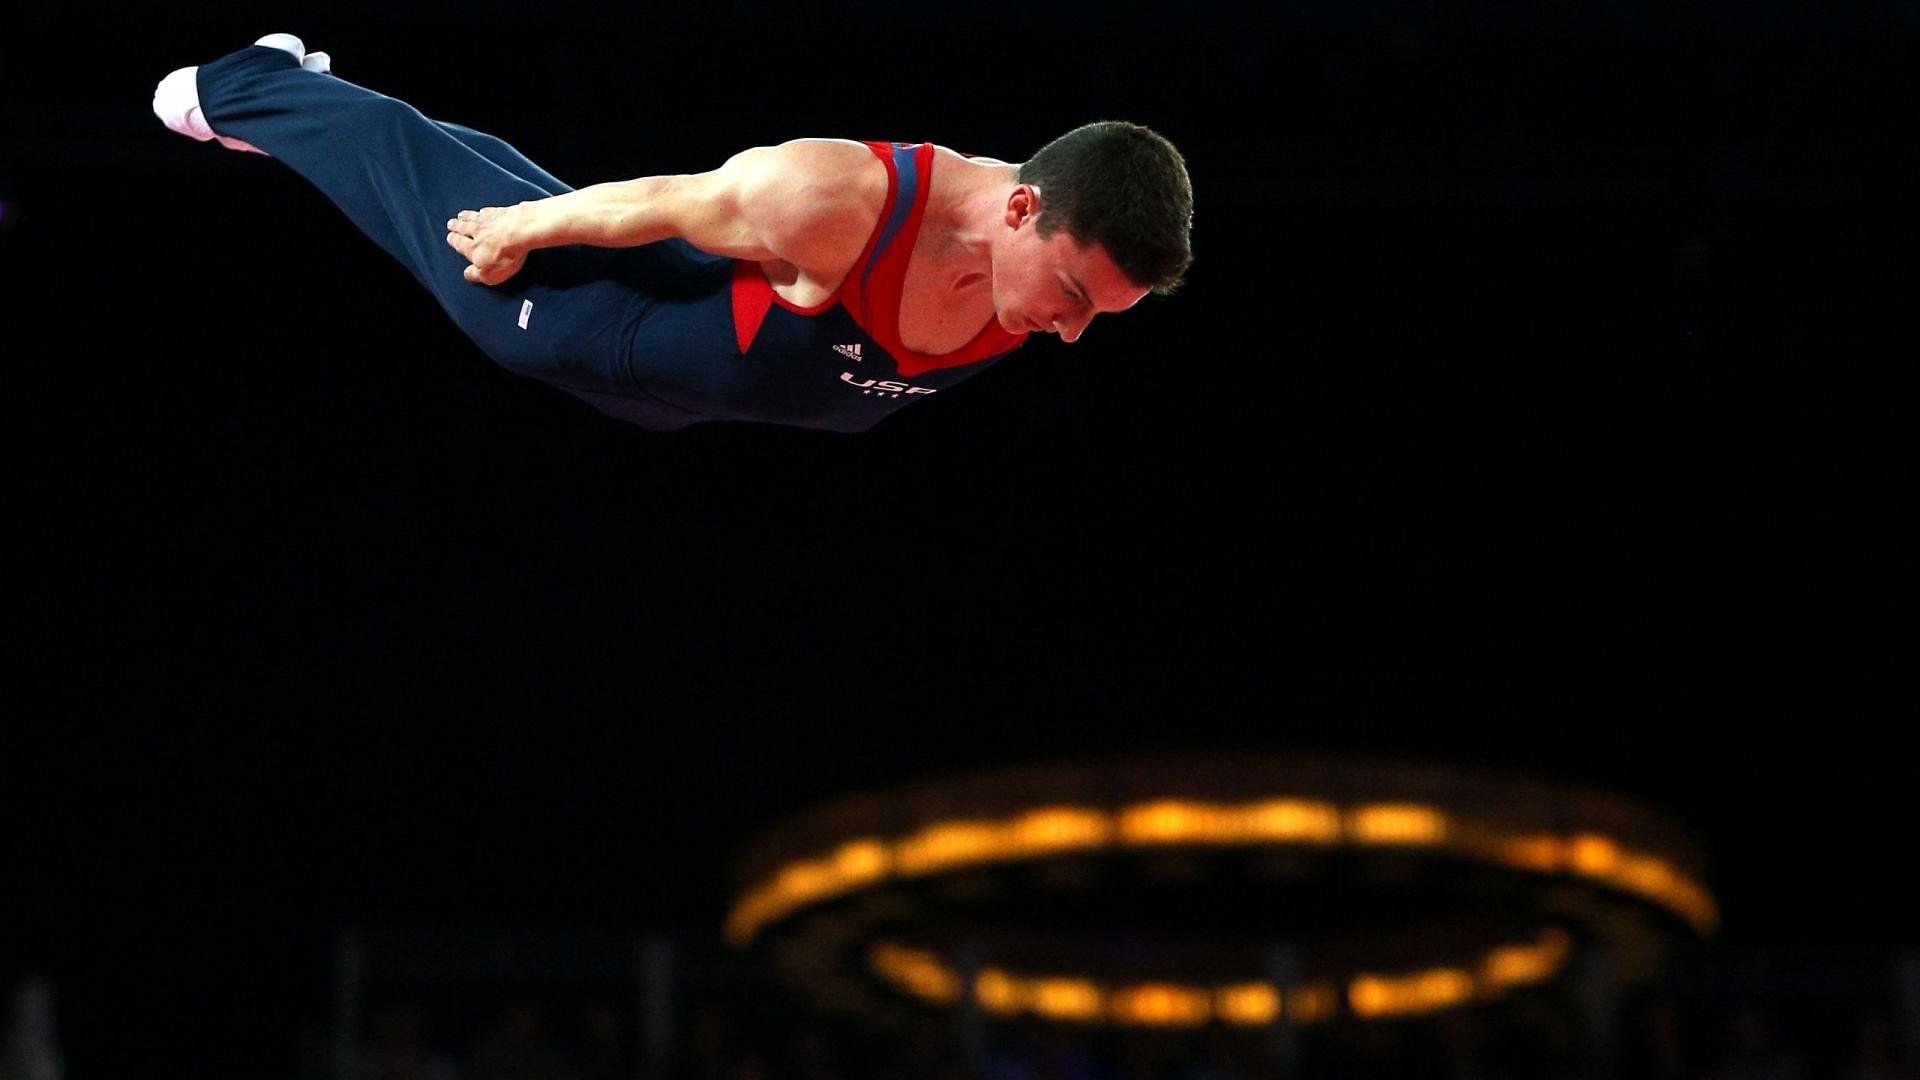 Trampolining: Power tumbling, A gymnastics discipline in which participants perform a series of acrobatic skills down a long track. 1920x1080 Full HD Background.